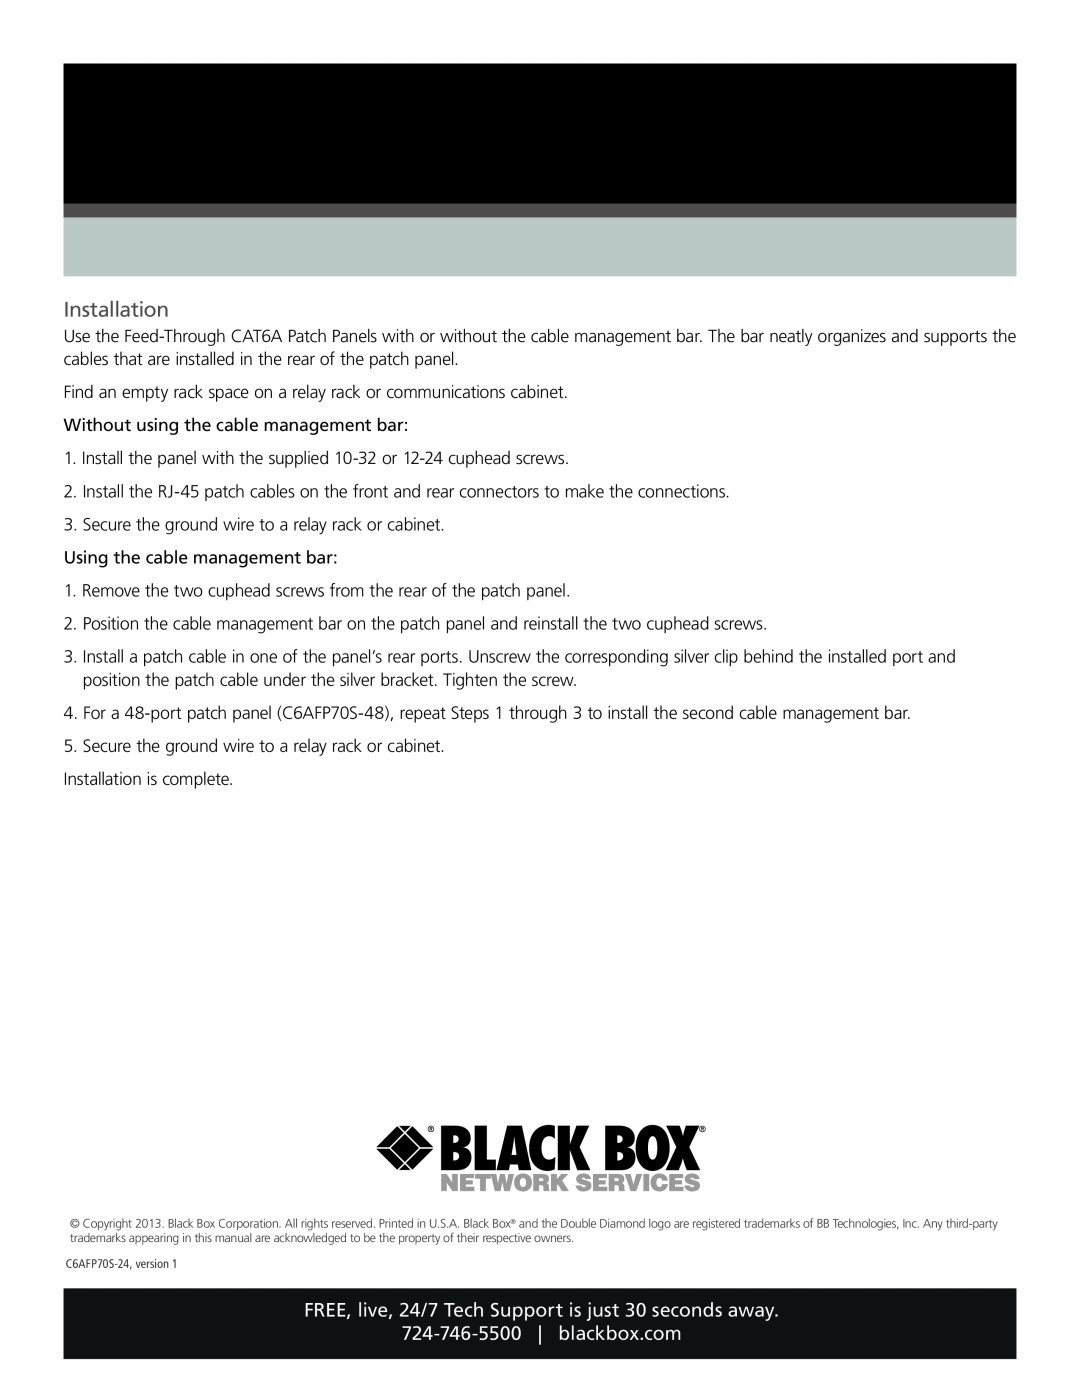 Black Box Black Box Feed-Through CAT6A Patch Panels Installation, FREE, live, 24/7 Tech Support is just 30 seconds away 